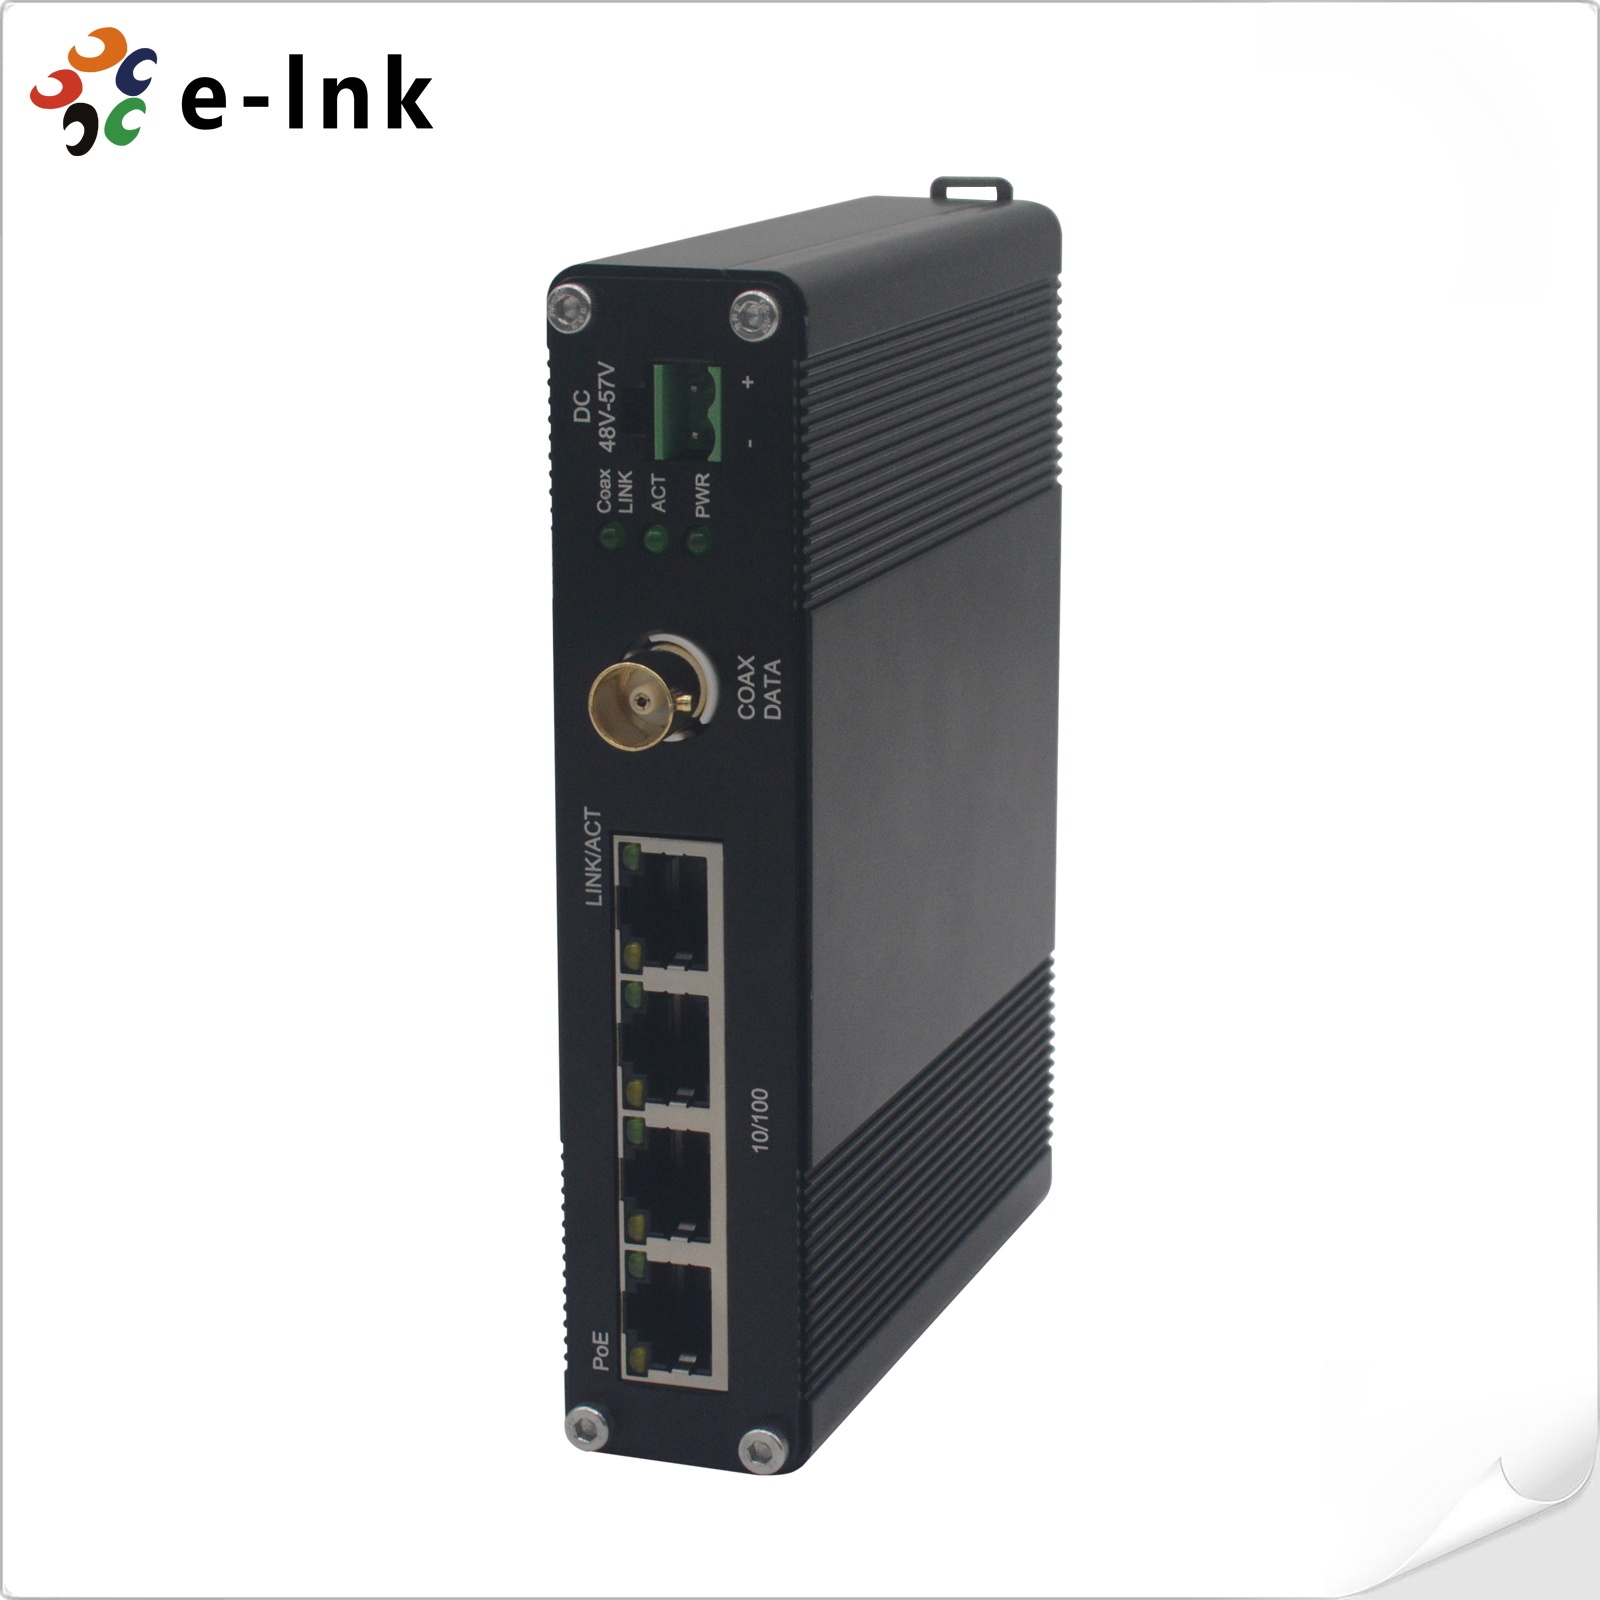 DIN-Rail Transmitter of 4-port 10/100Mbps TX (PoE+) to 1-port Coax Ethernet Switch with PoC